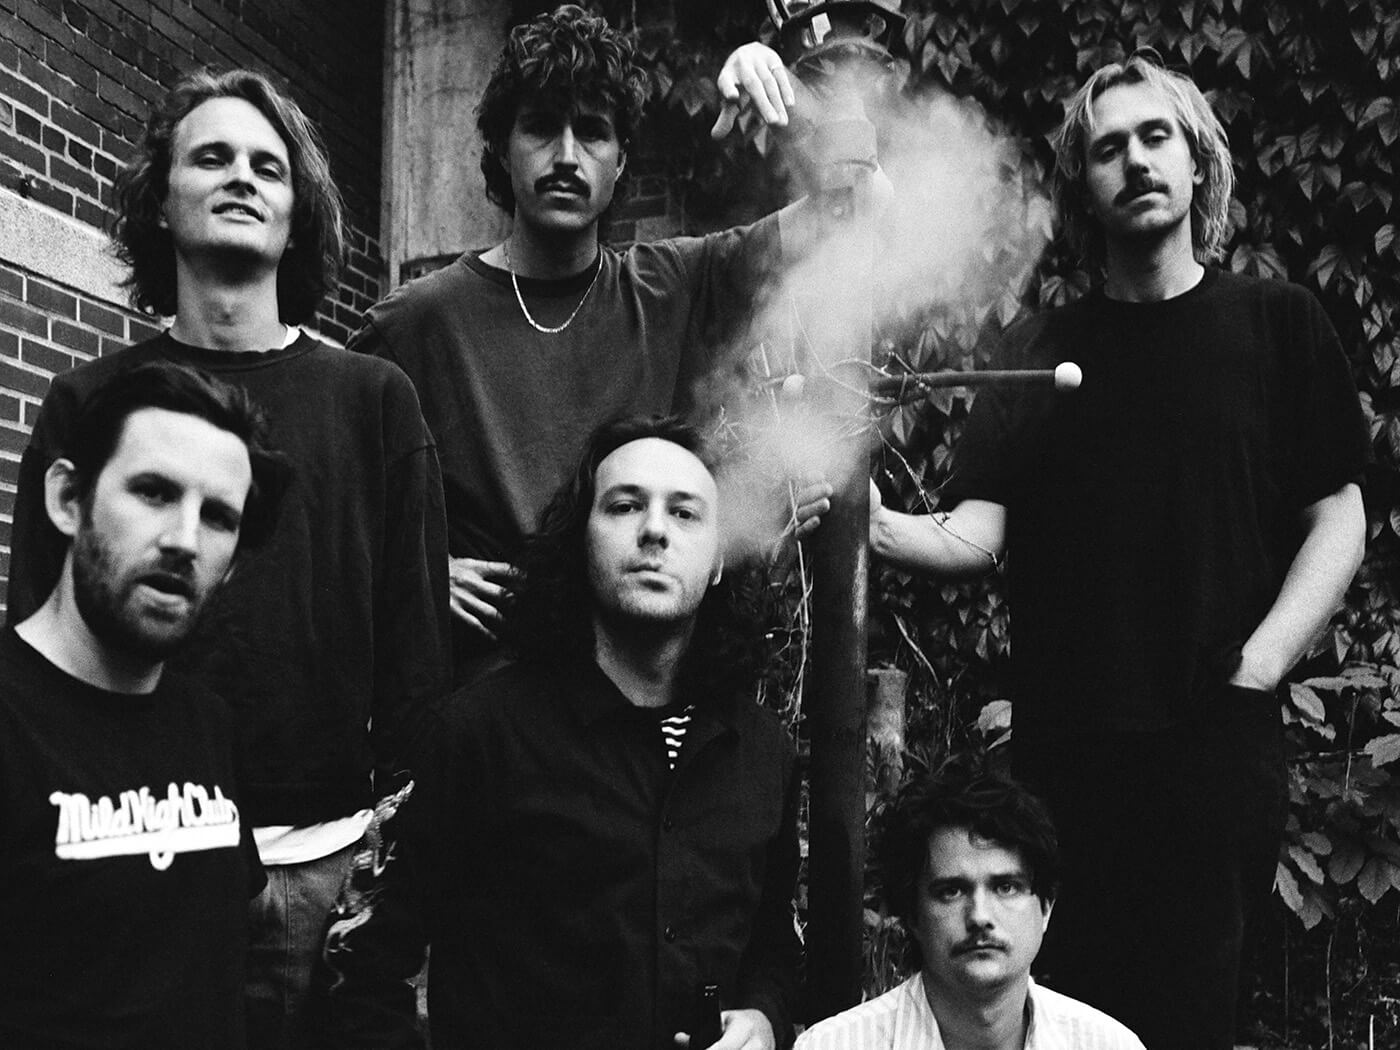 King Gizzard and The Lizard Wizard – Ice, Death, Planets, Lungs, Mushrooms and Lava/Laminated Denim/Changes